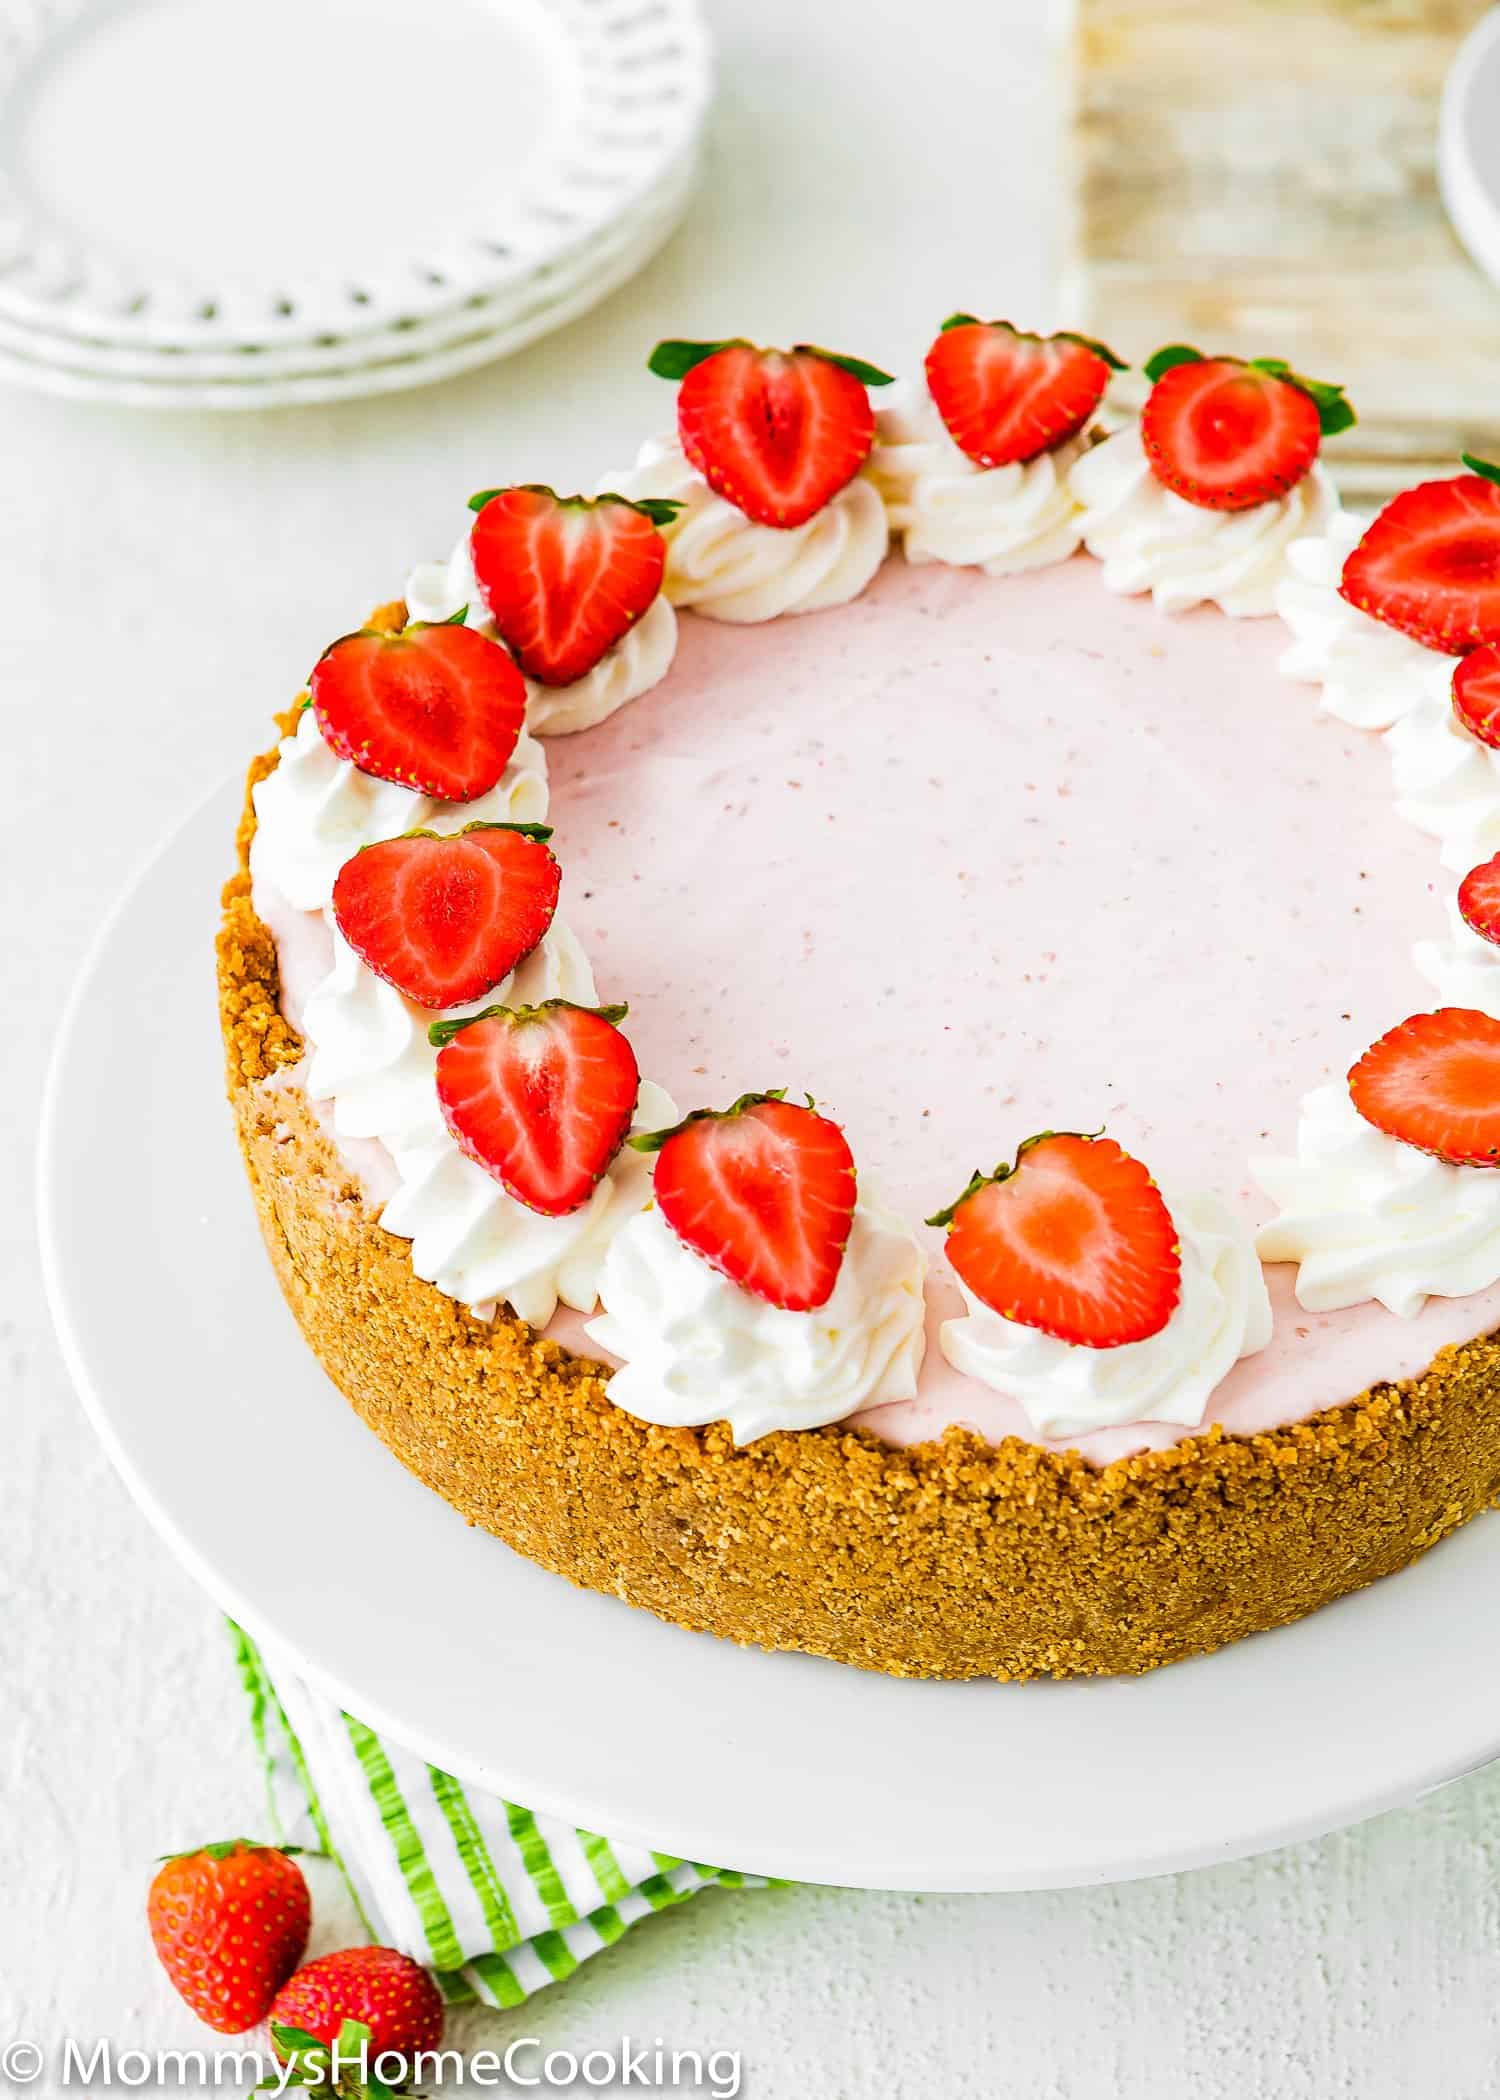 No-Bake Strawberry Cheesecake with fresh strawberries and whipped cream on top.